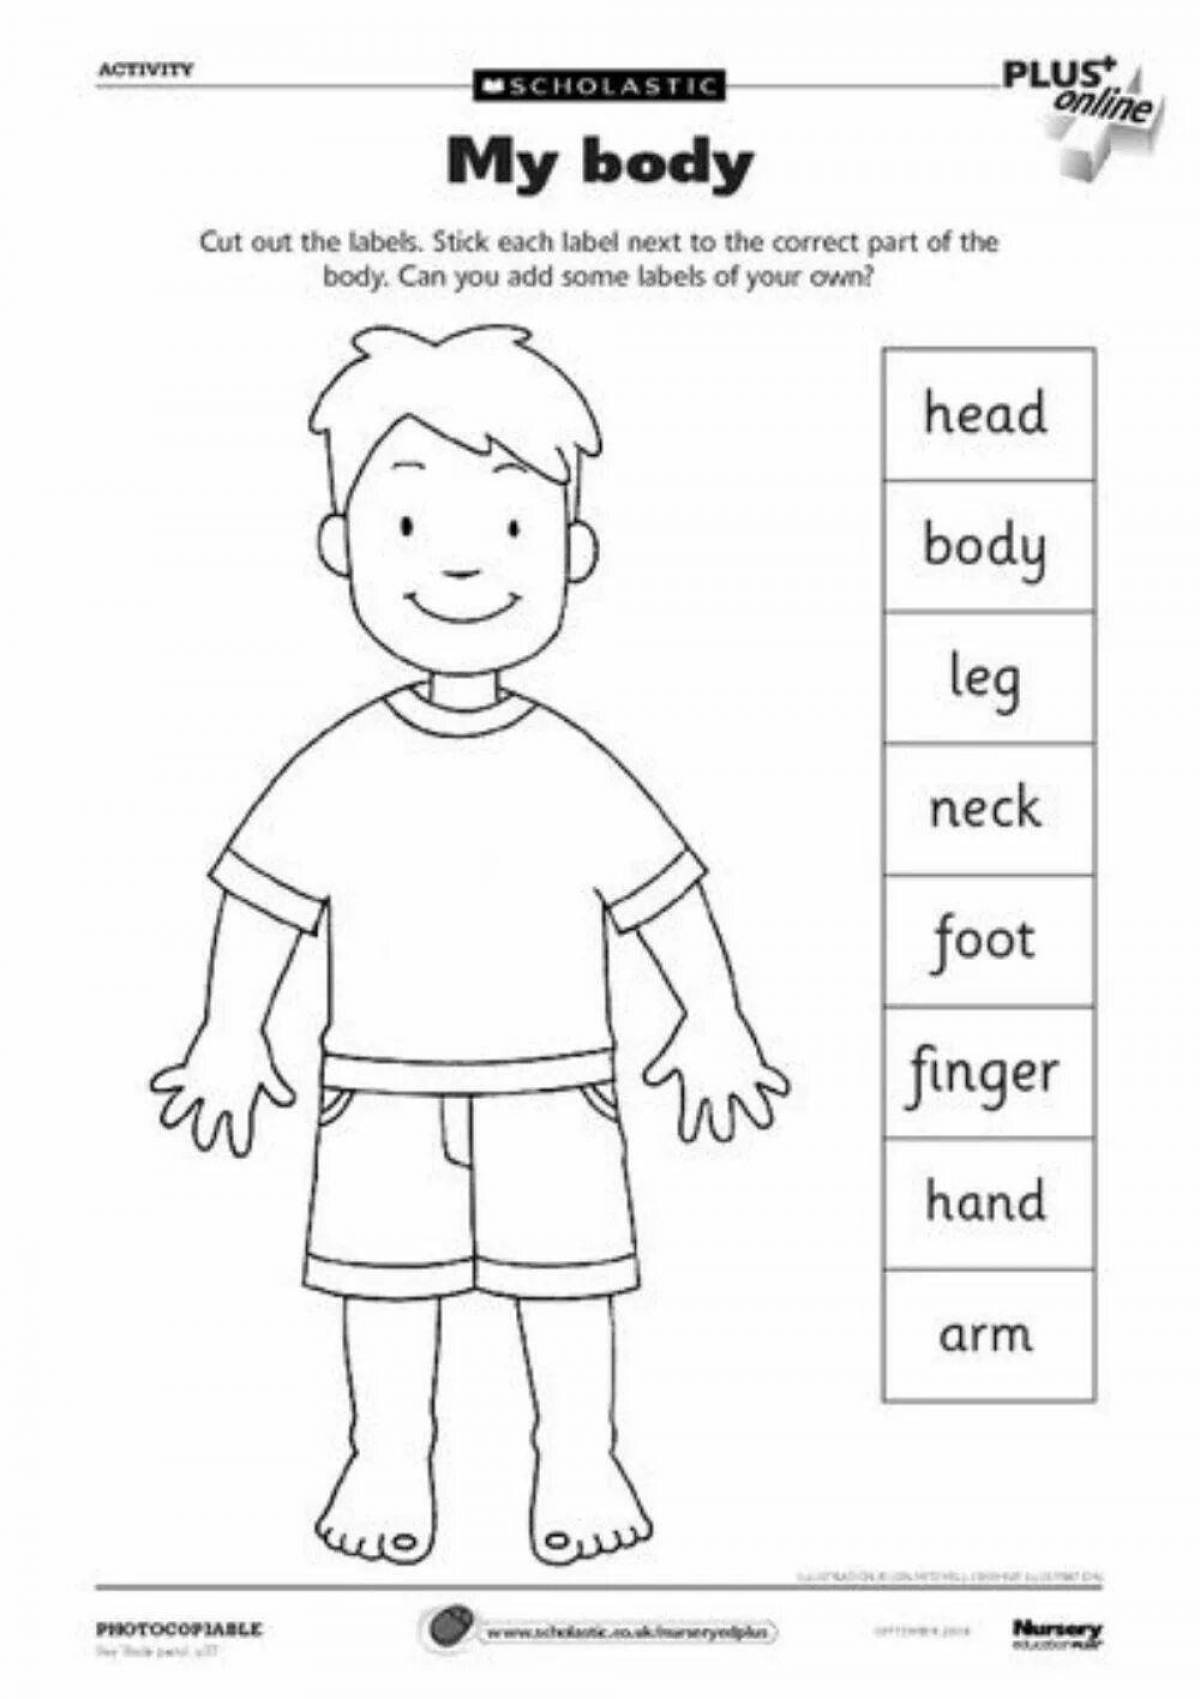 Body parts in english for kids #3